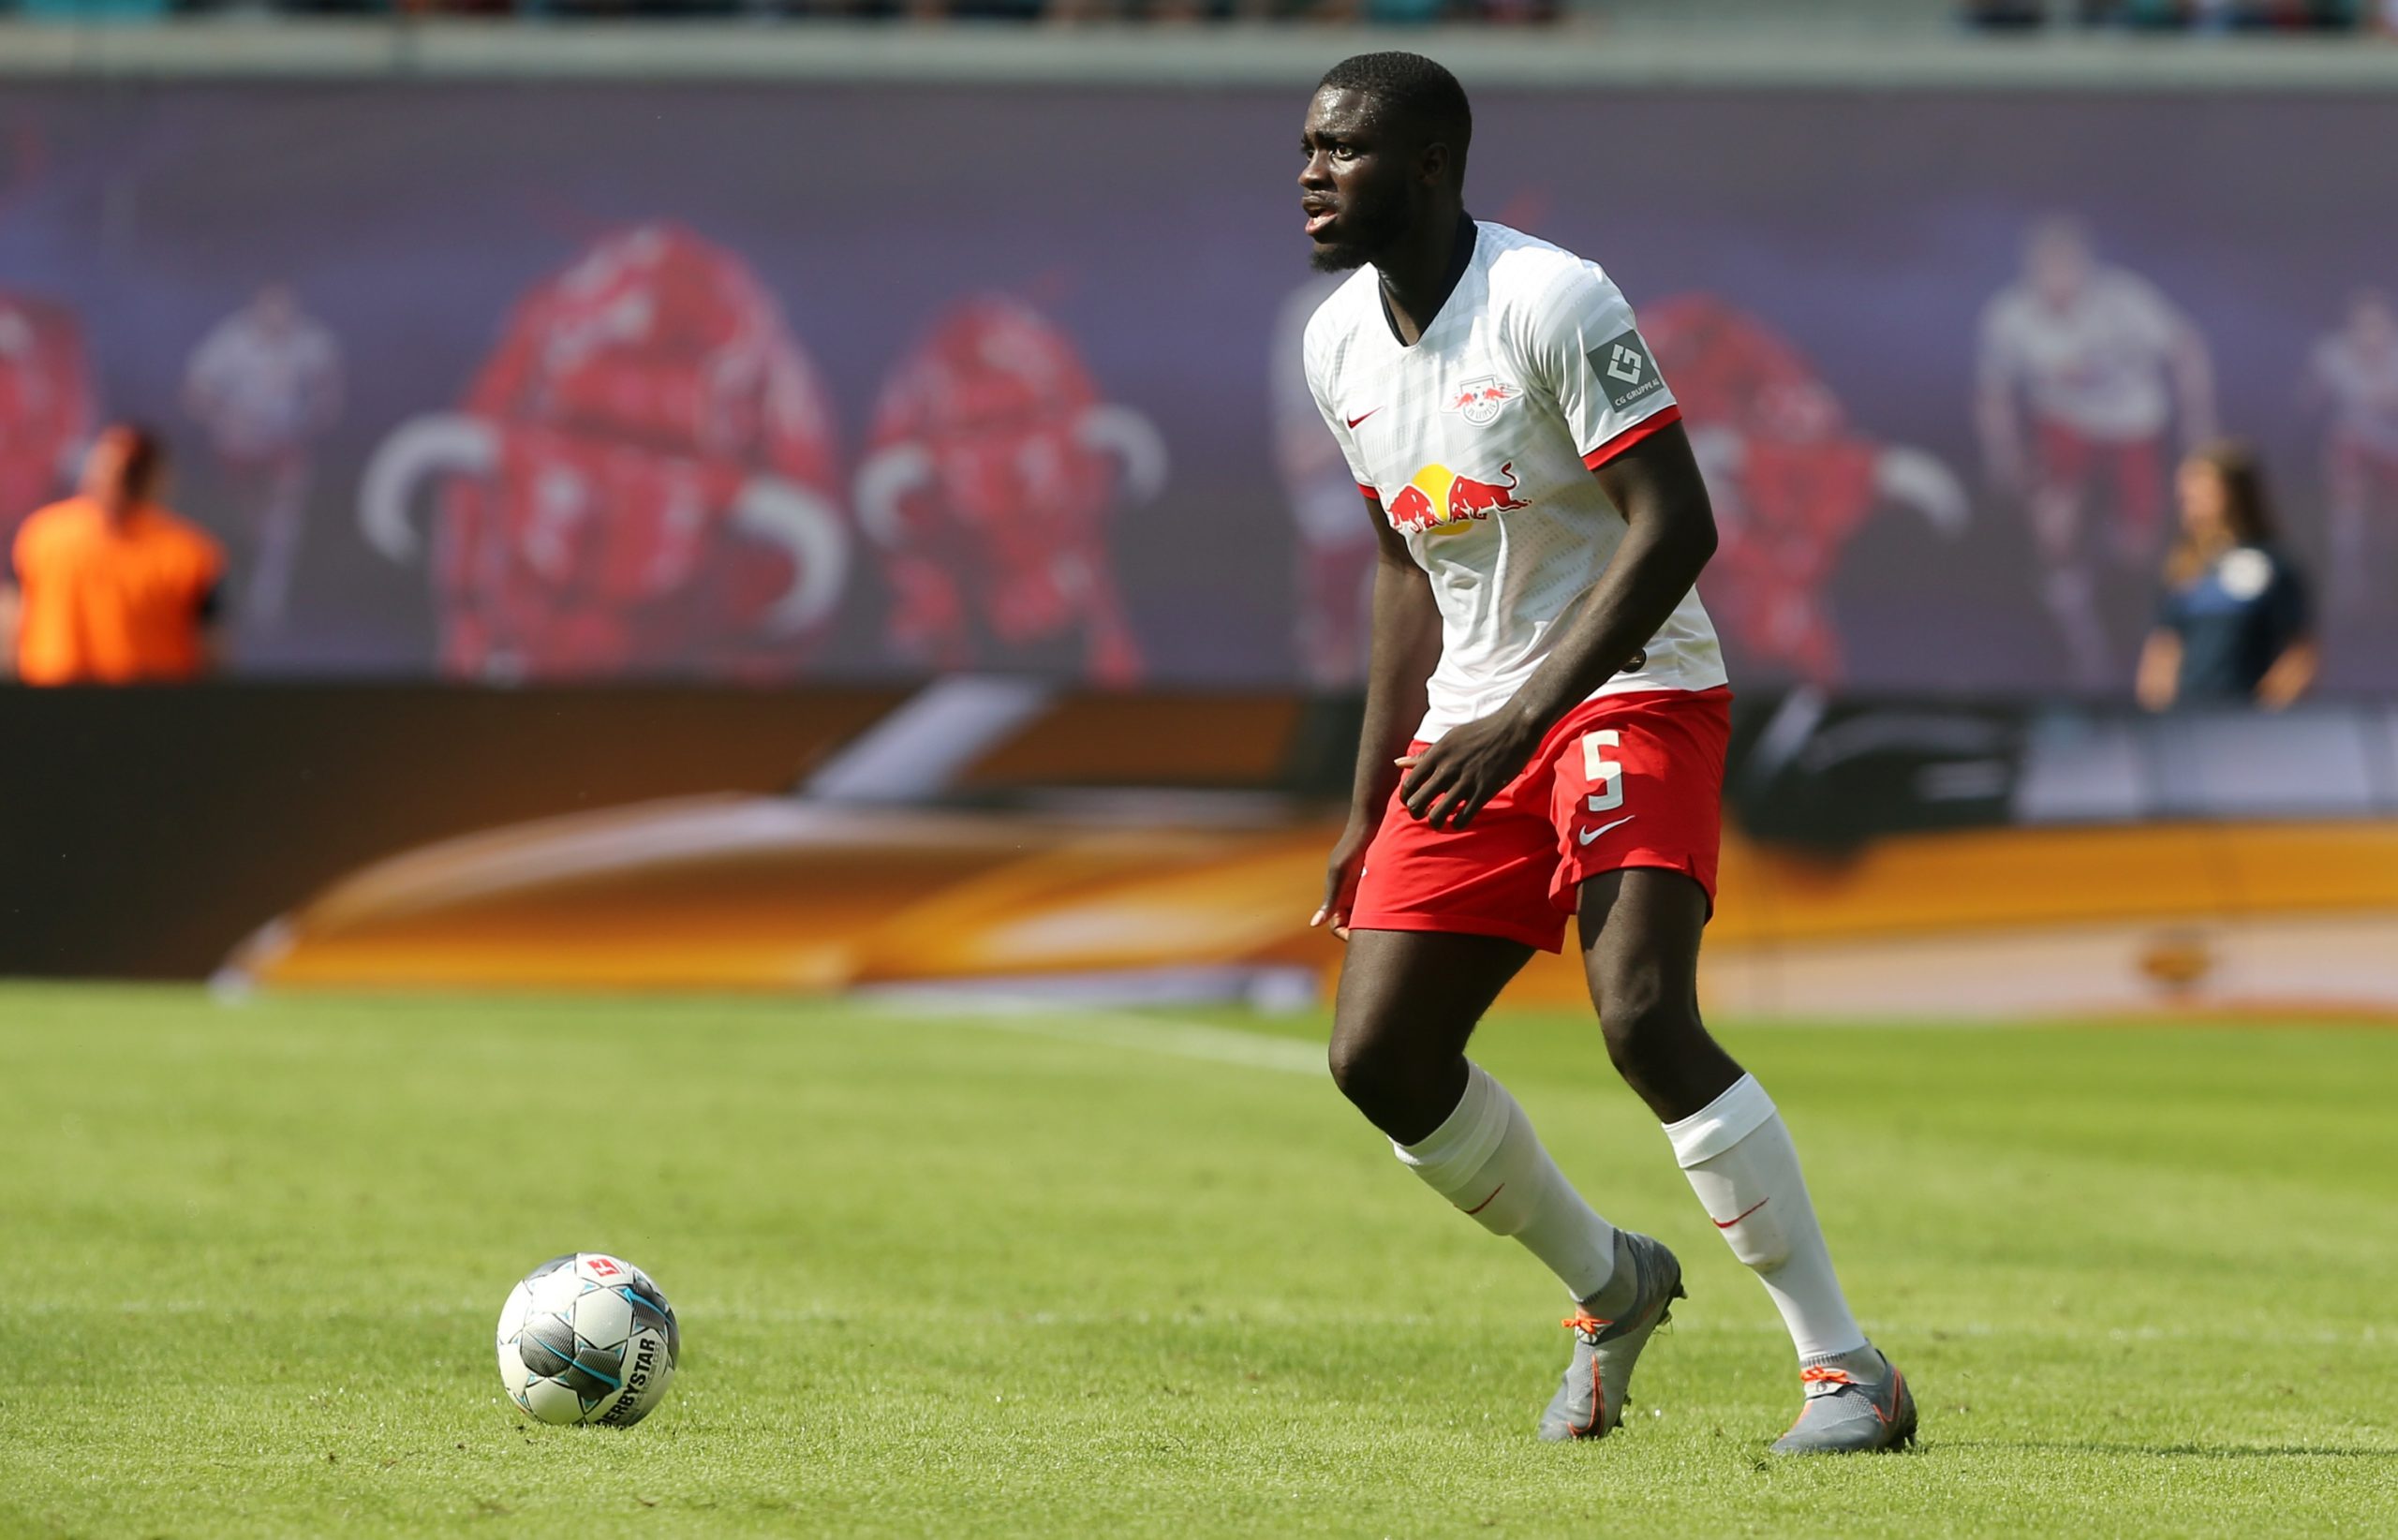 Dayot Upamecano of Leipzig runs with the ball during the pre-season friendly match between RB Leipzig and Aston Villa at Red Bull Arena on August 3, 2019 in Leipzig, Germany.  (Photo by Matthias Kern/Bongarts/Getty Images)